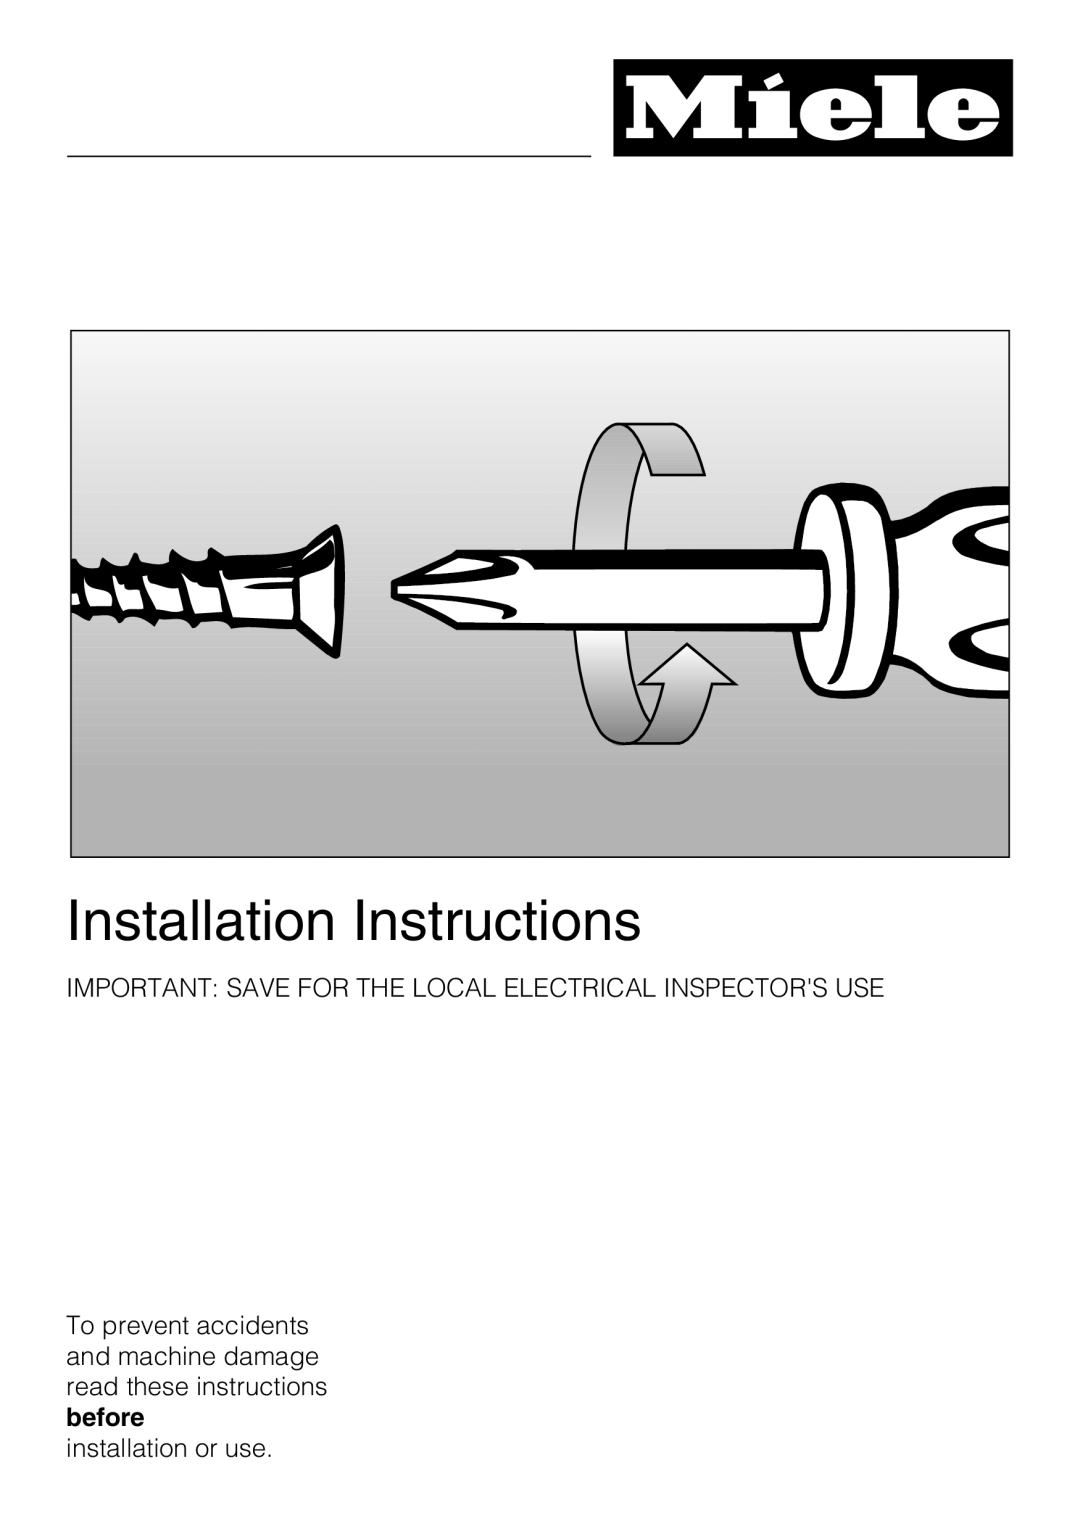 Miele CS 1223 Installation Instructions, Important Save For The Local Electrical Inspectors Use, installation or use 